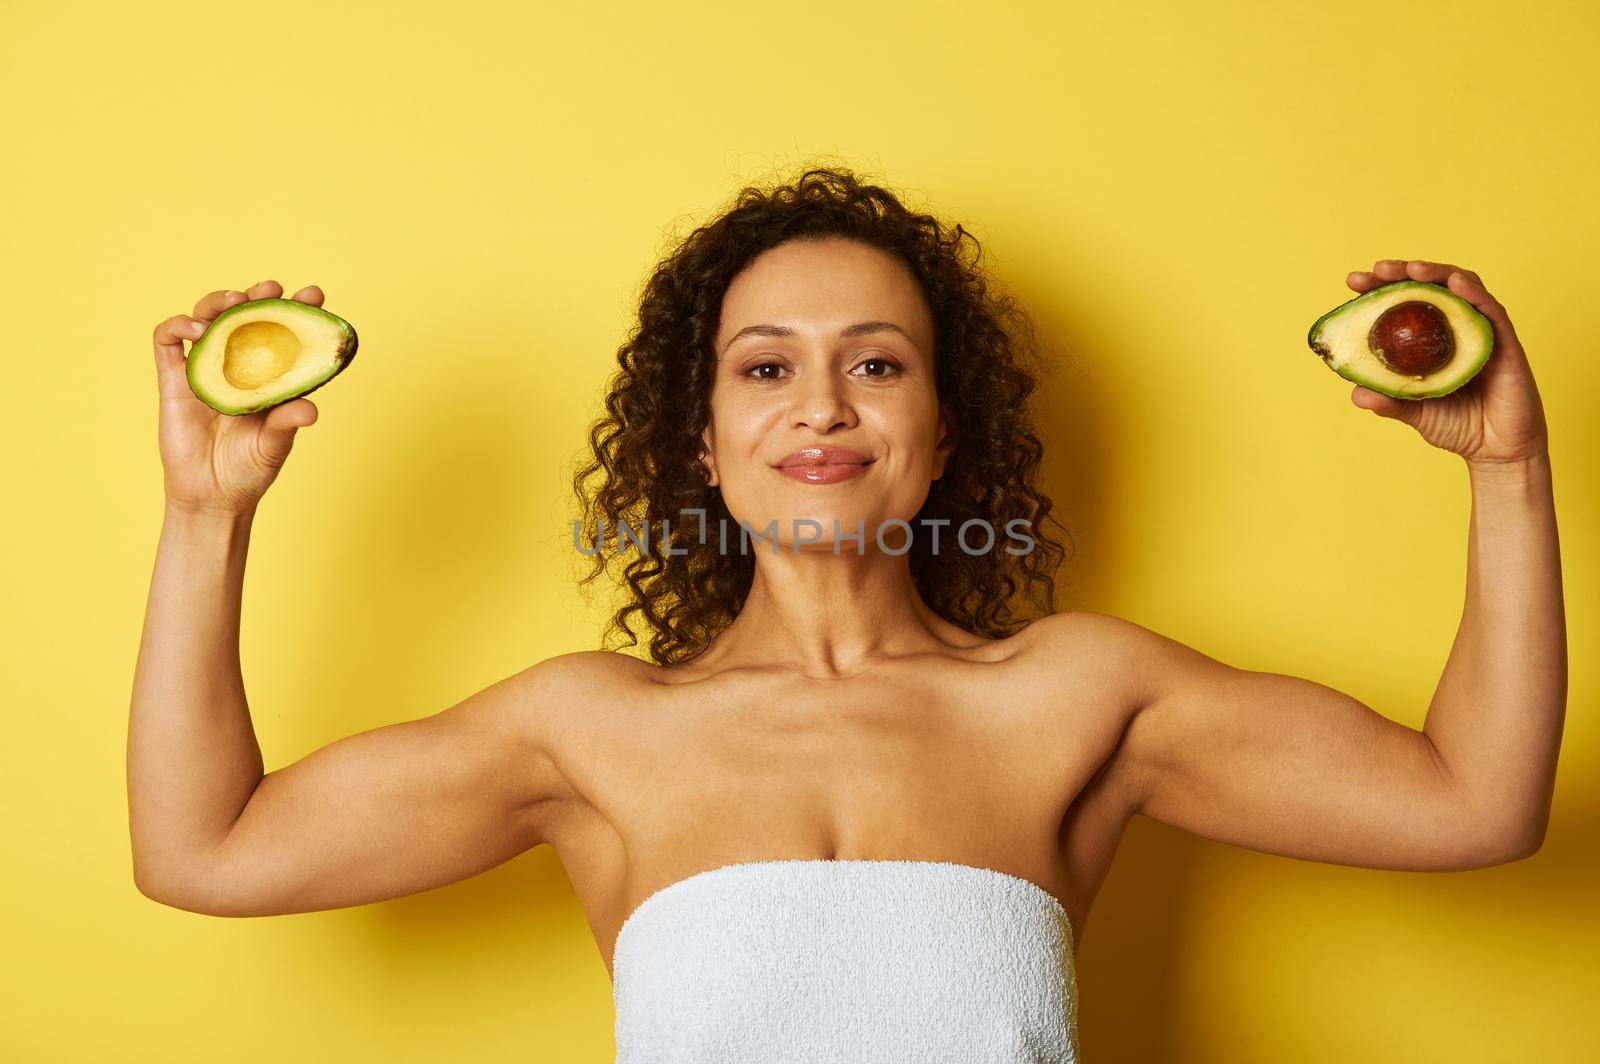 Young curly and muscular build African American woman wrapped in a bath towel holding two halves of ripe avocado, standing against yellow background with copy space